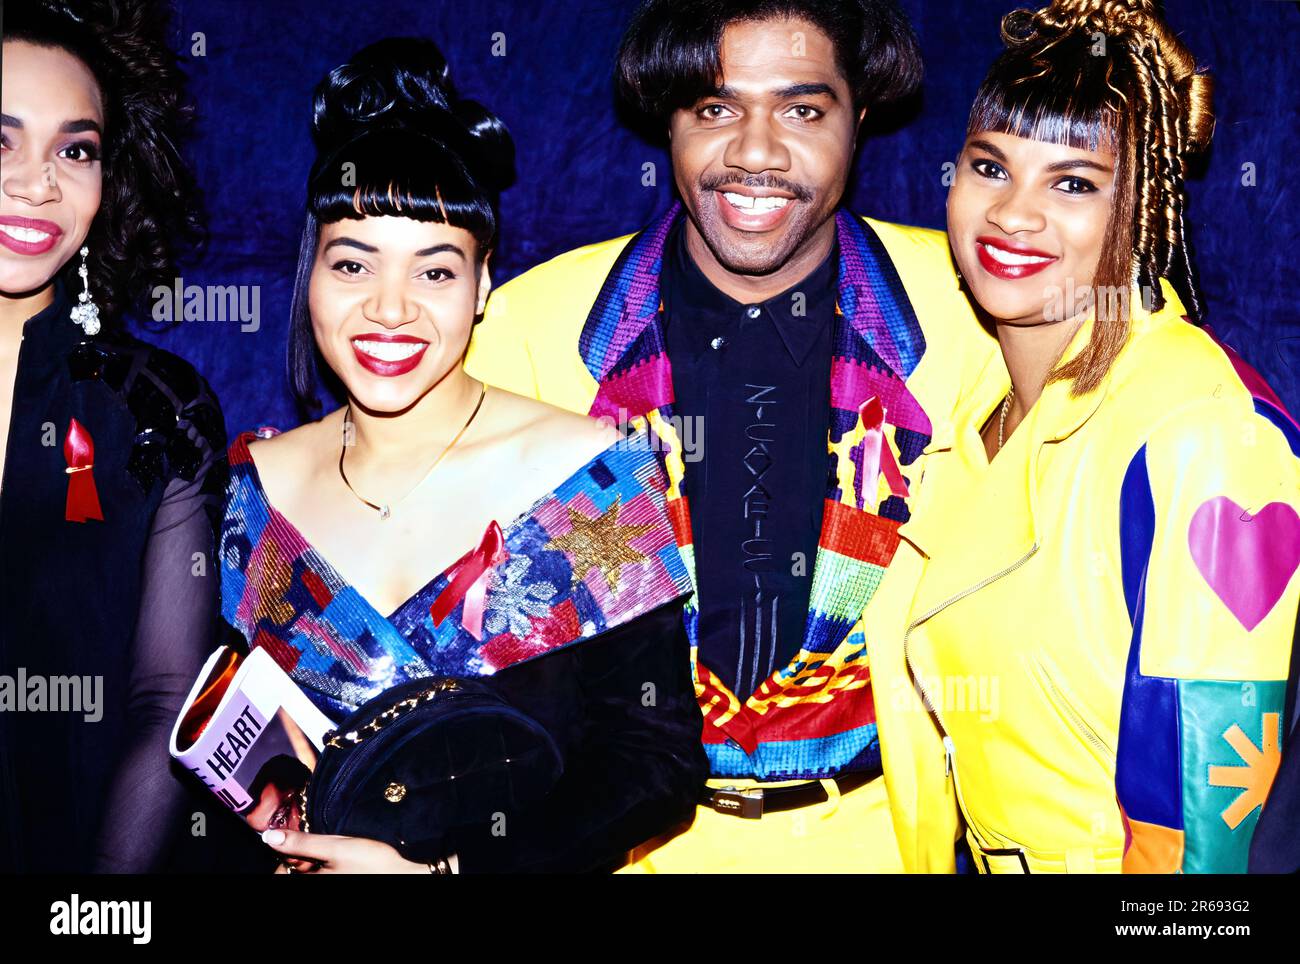 https://c8.alamy.com/comp/2R693G2/celebrity-photos-from-the-90s-i-shot-on-e6-in-hollywood-salt-n-pepa-with-spinderella-atlantic-star-singer-david-lewis-at-an-awards-show-backstage-2R693G2.jpg